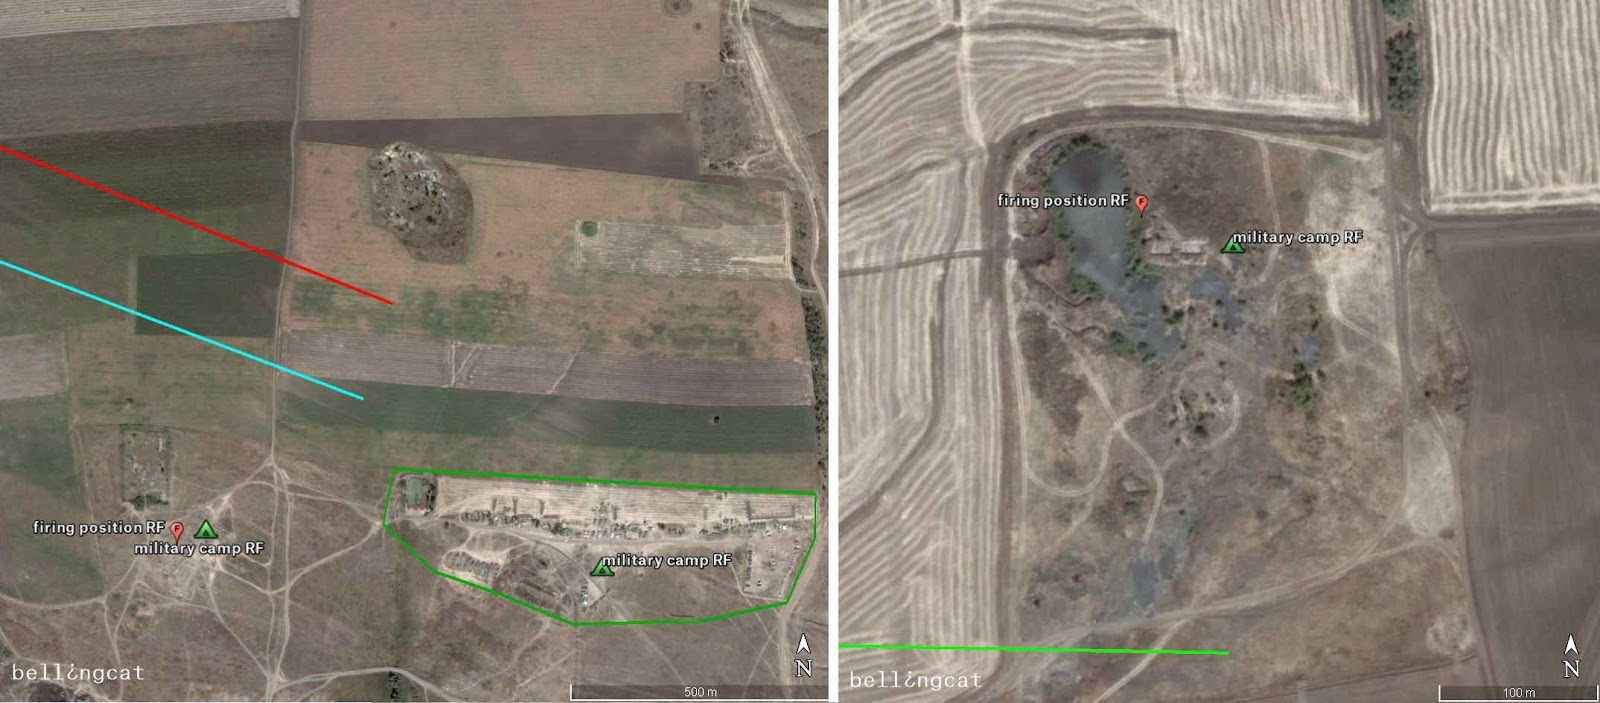 Firing position 1 and military camp (left) and Firing position 2 and military camp (right) Both Google Earth satellite images from 08/08/2014